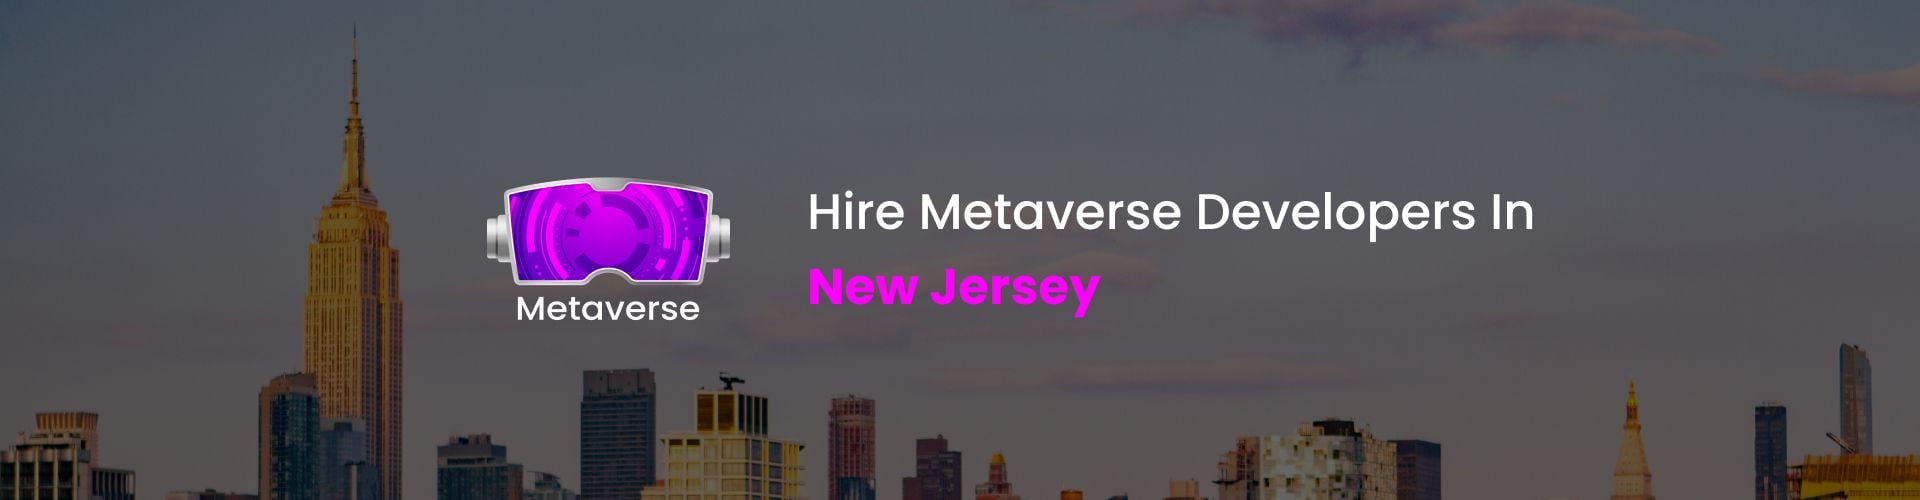 hire metaverse developers in new jersey